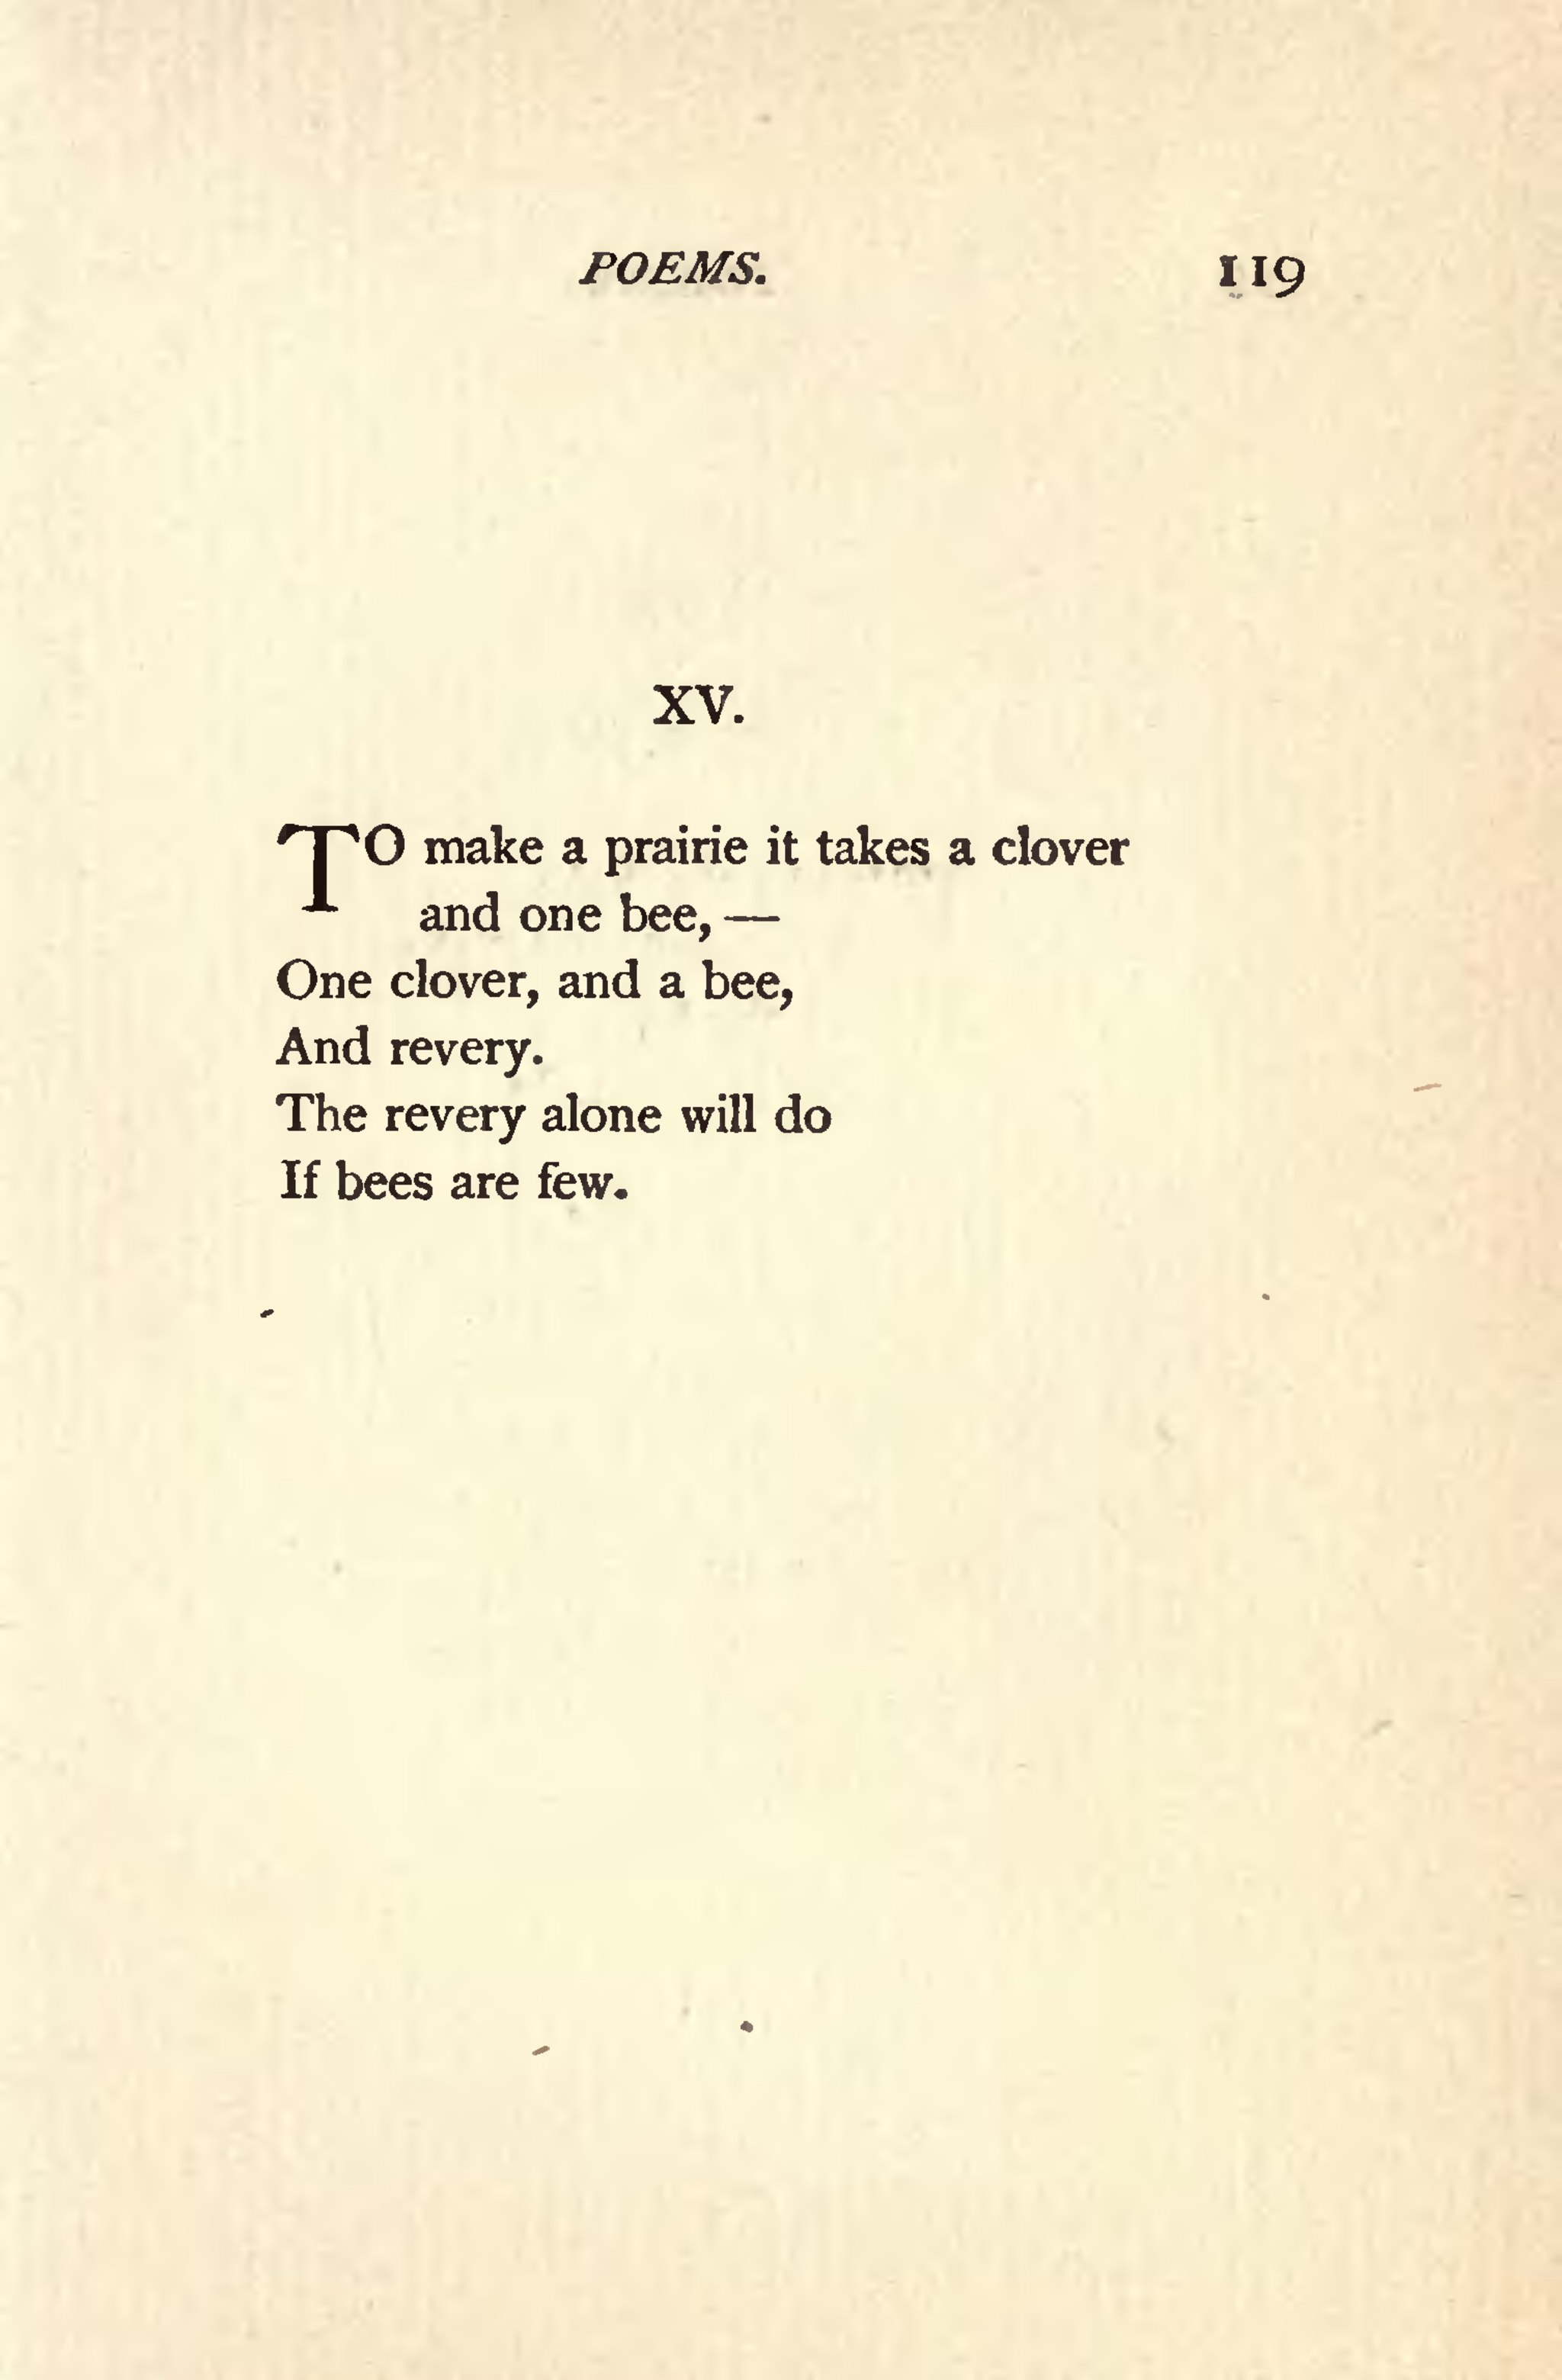 A typewritten version of the same poem by Emily Dickinson, that reads: TO make a prairie it takes a clover, and one bee,—One clover, and a bee, And revery. The revery alone will do, If bees are few.